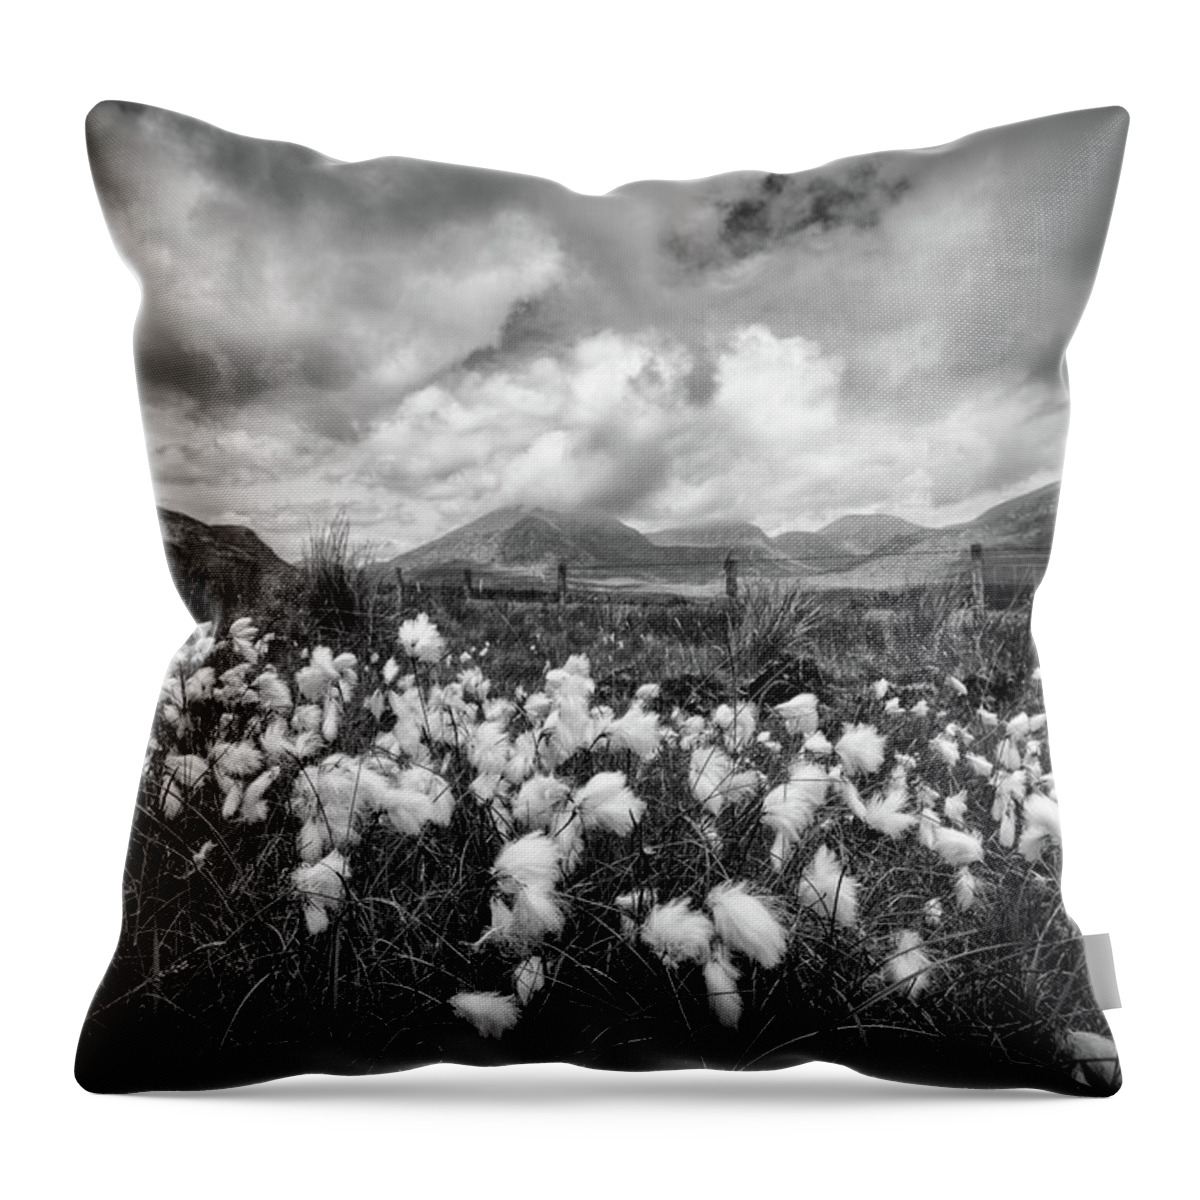 Grass Throw Pillow featuring the photograph Mournes Bog Cotton by Nigel R Bell